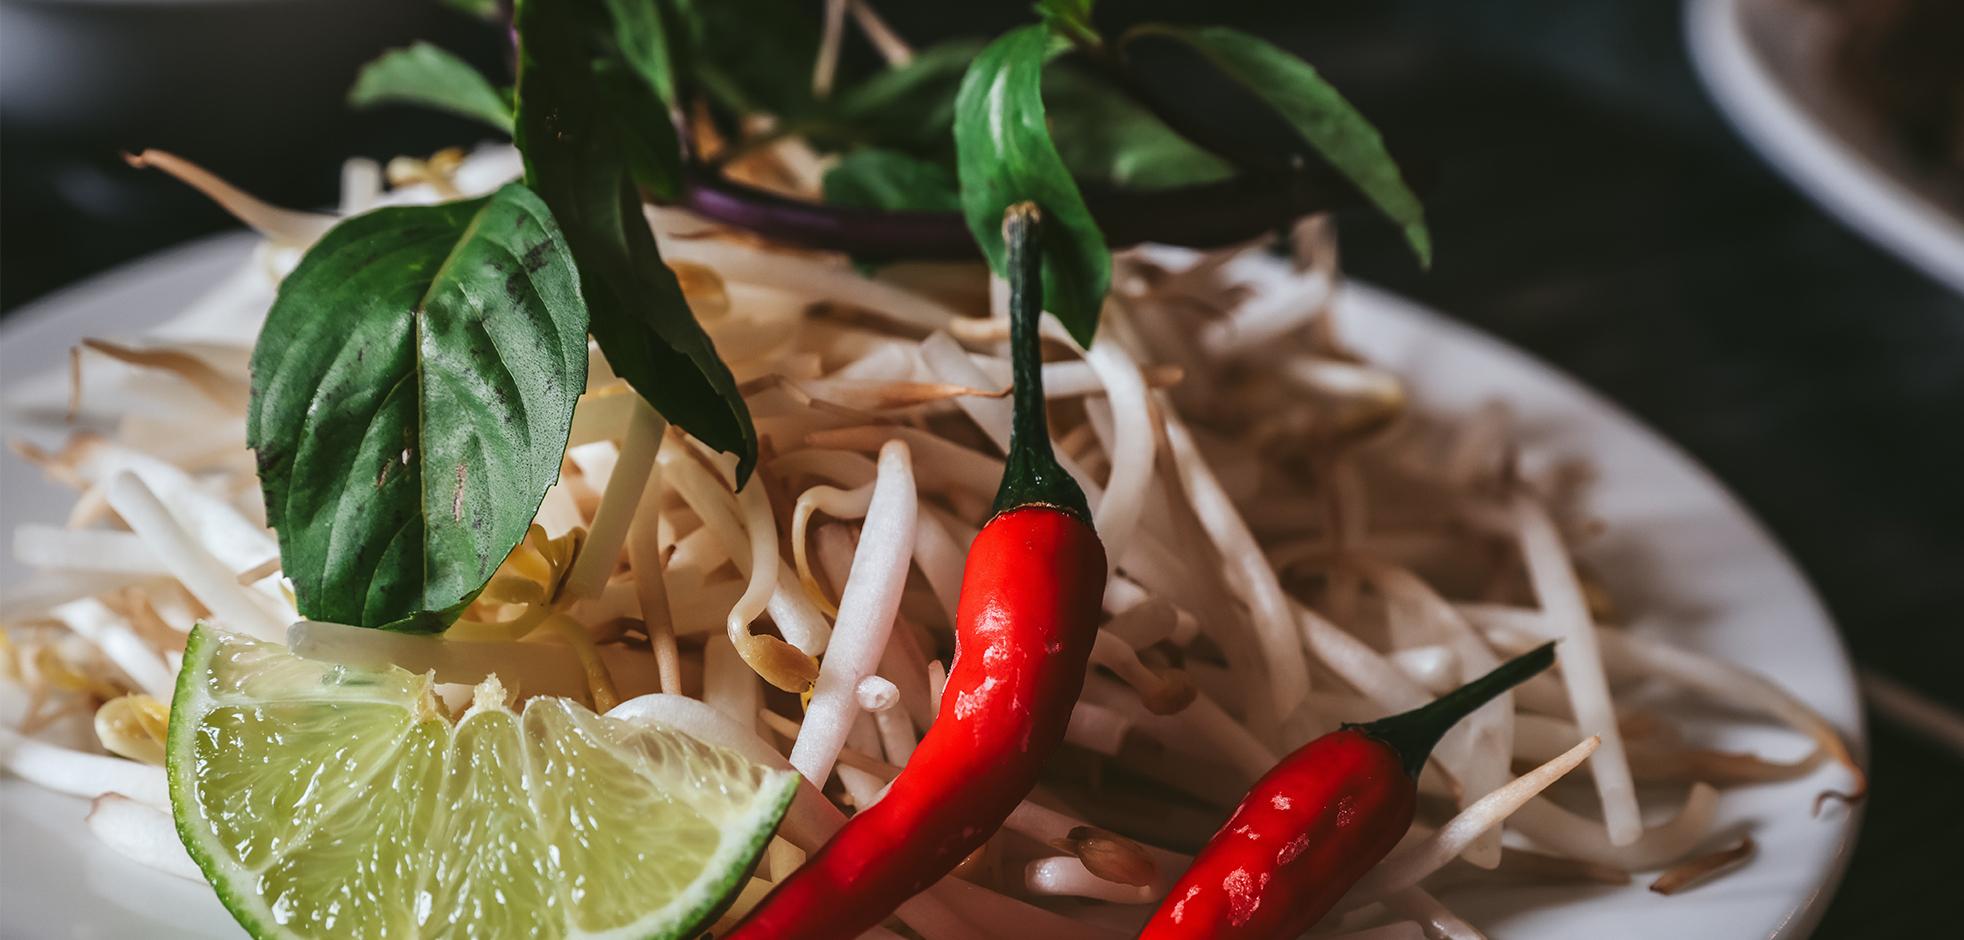 a plate of bean sprouts with chili peppers and wedge of lime